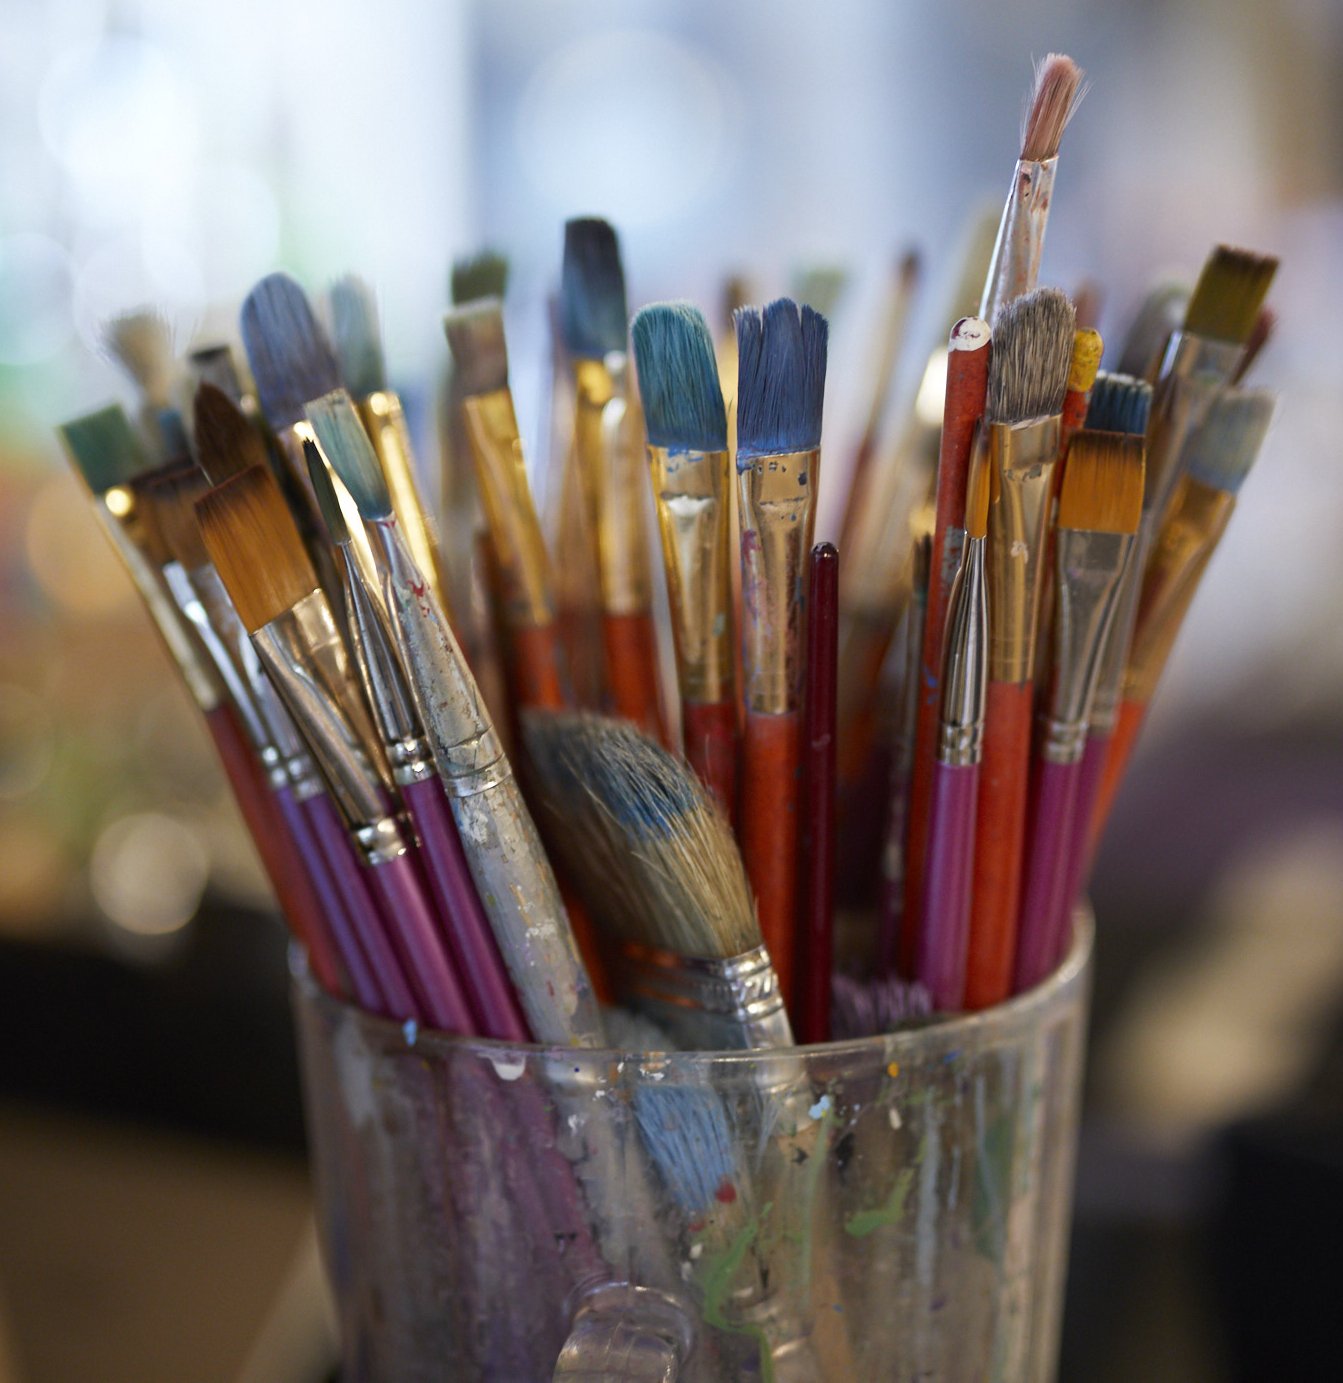 Slideshow: 'Dine and Paint with a Sunset View' - GCU News